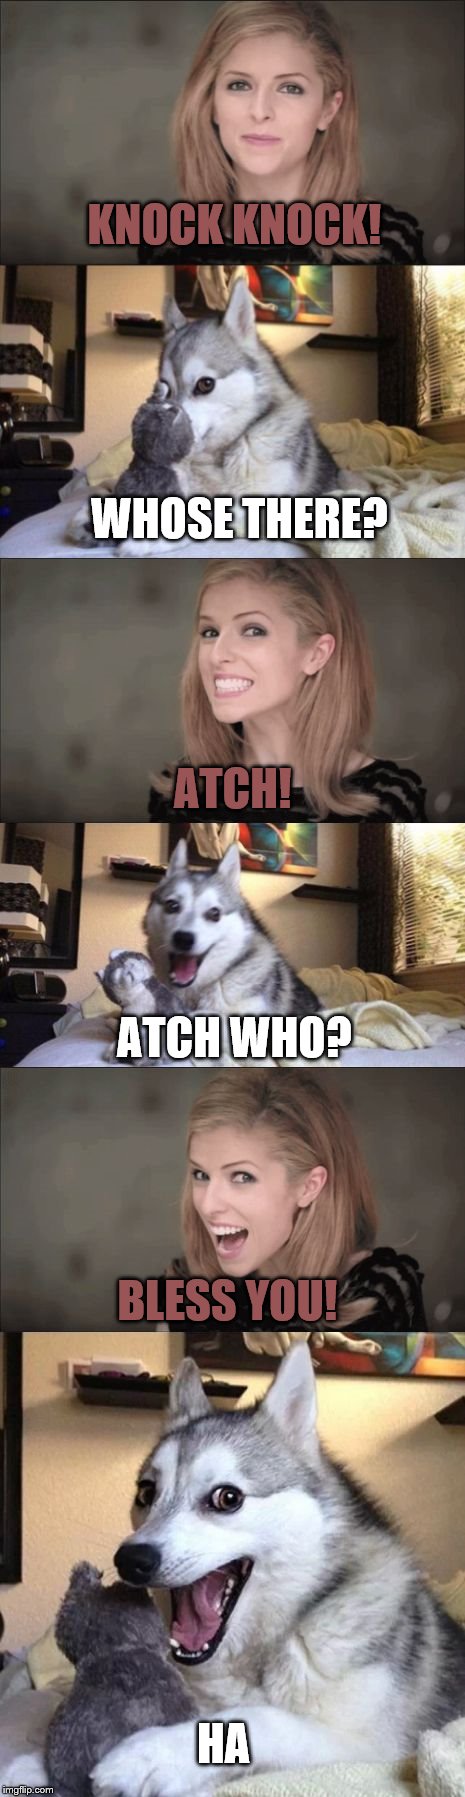 Anna and Bad Pun Dog Work Together | KNOCK KNOCK! WHOSE THERE? ATCH! ATCH WHO? BLESS YOU! HA | image tagged in anna and bad pun dog work together | made w/ Imgflip meme maker